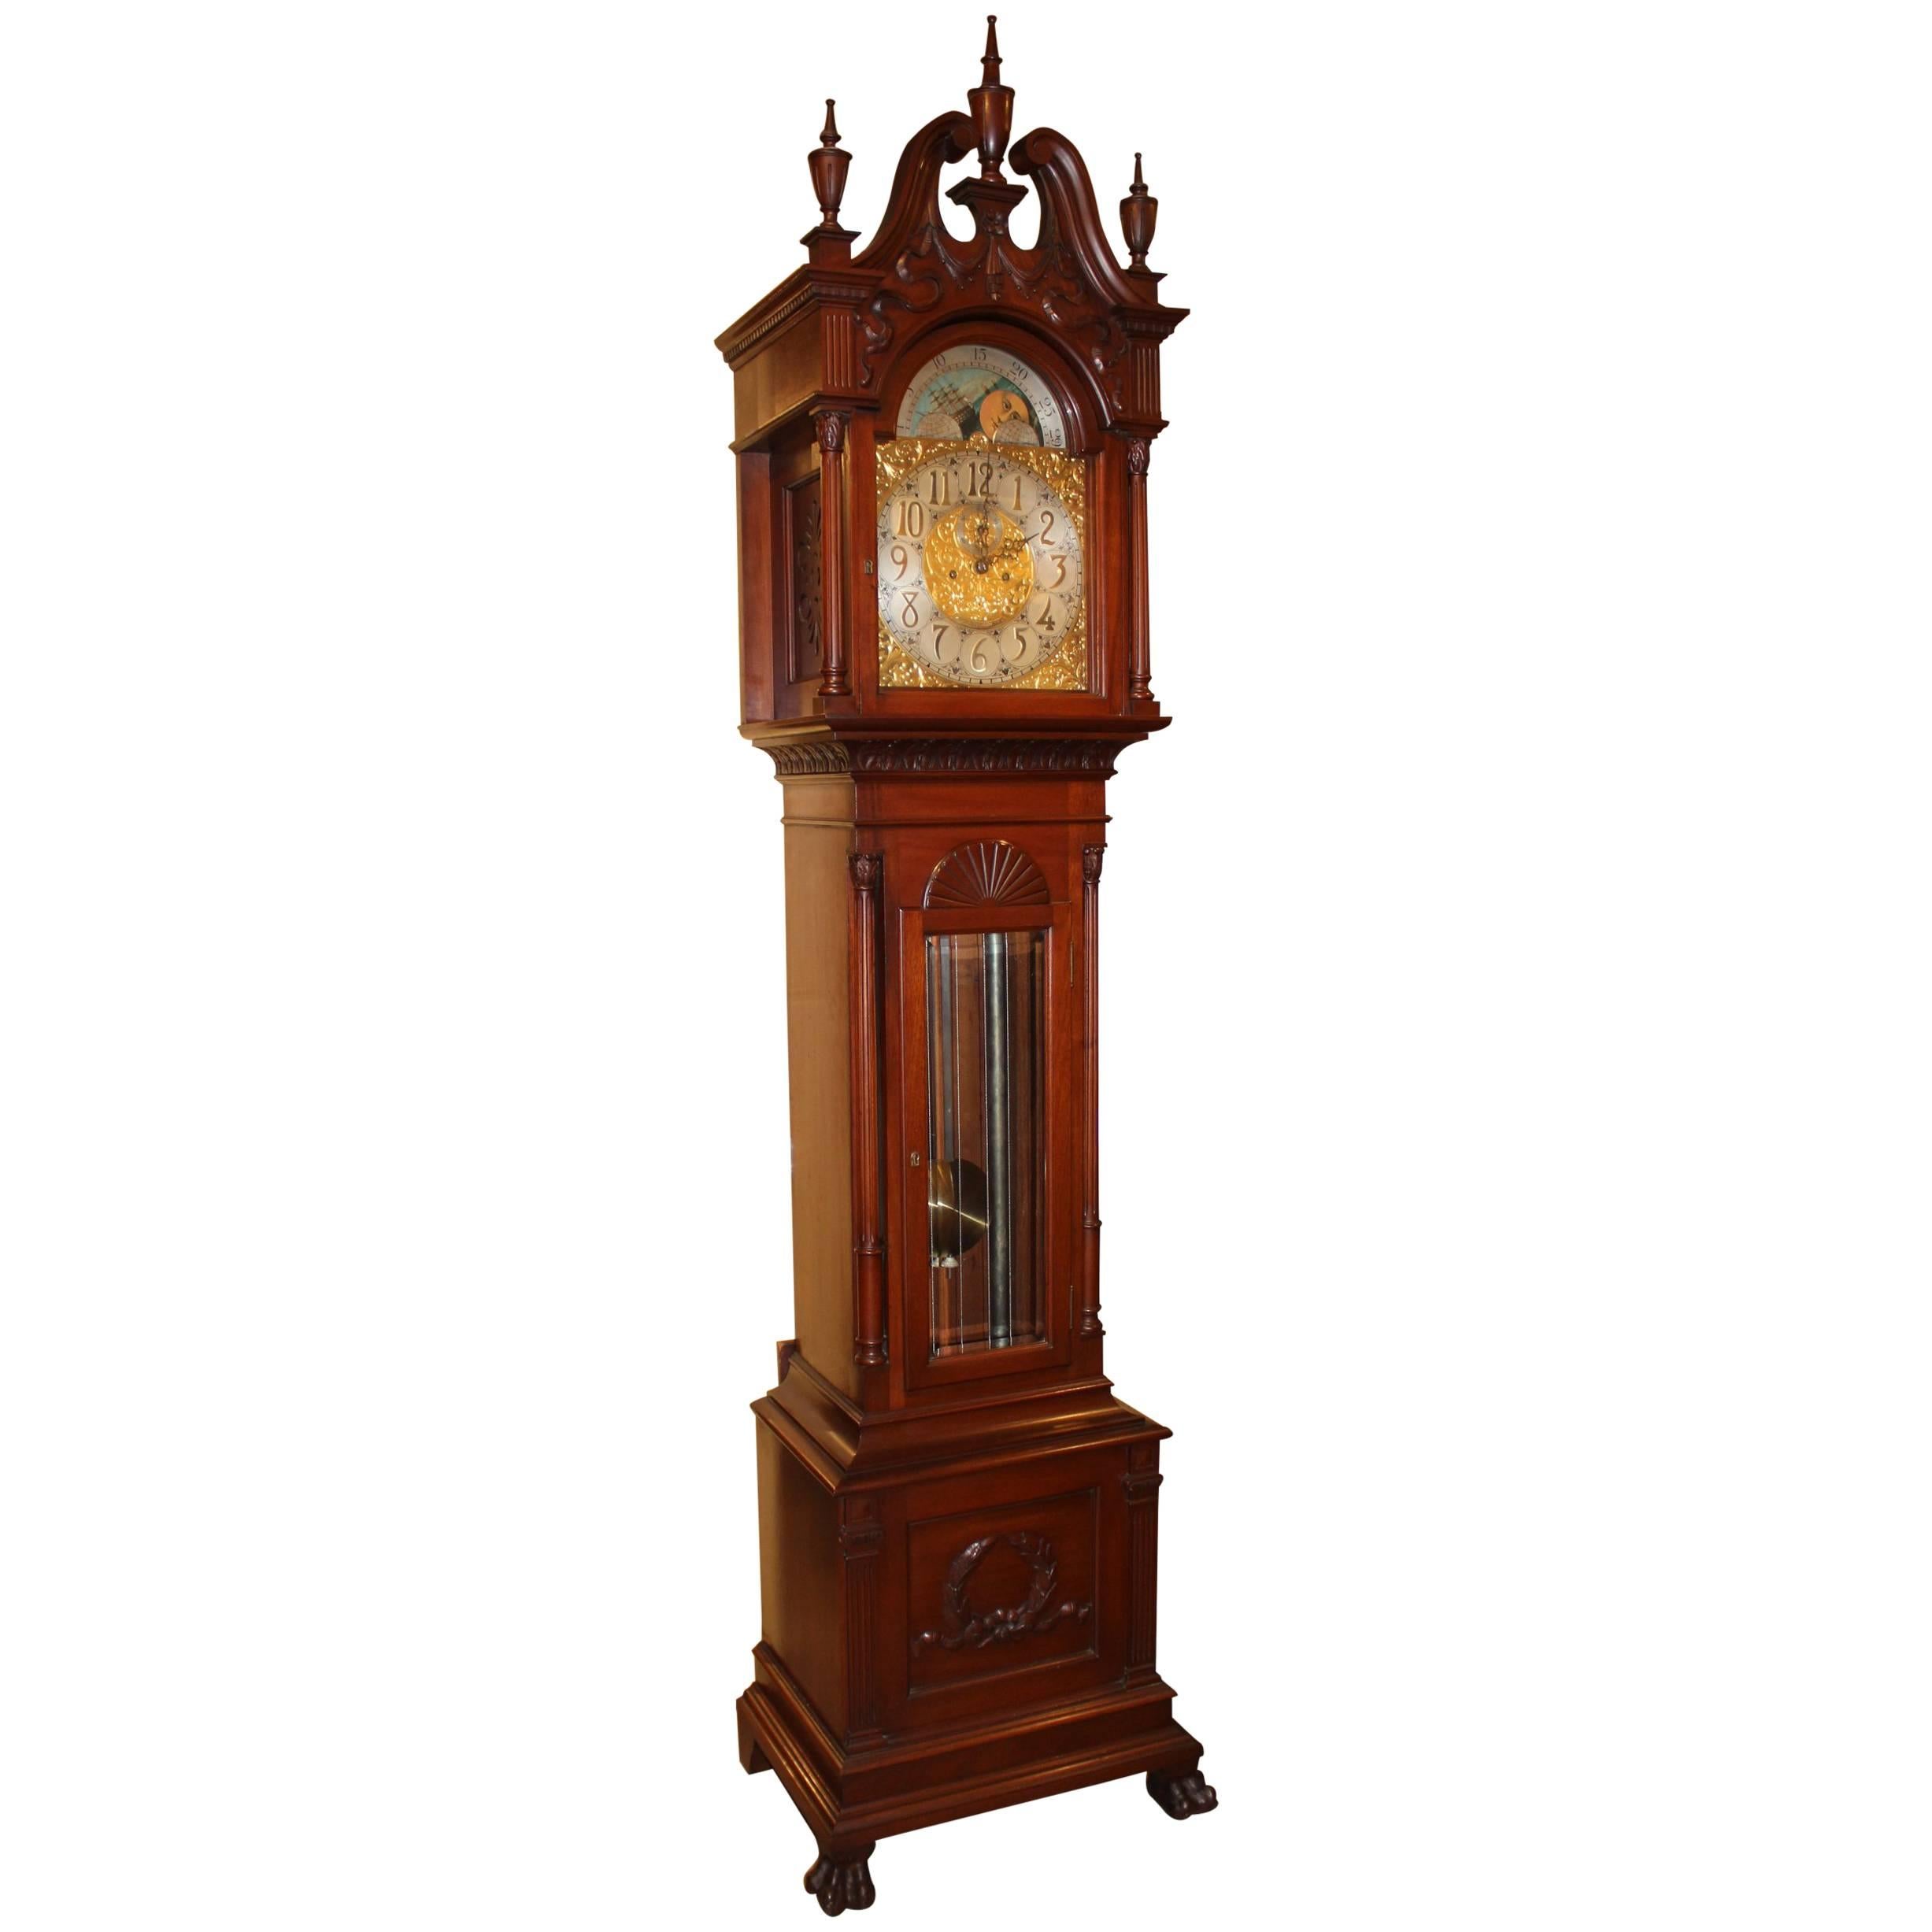 Exceptional Smith Patterson & Co Boston Mahogany Tall Clock with Moon Phase Dial